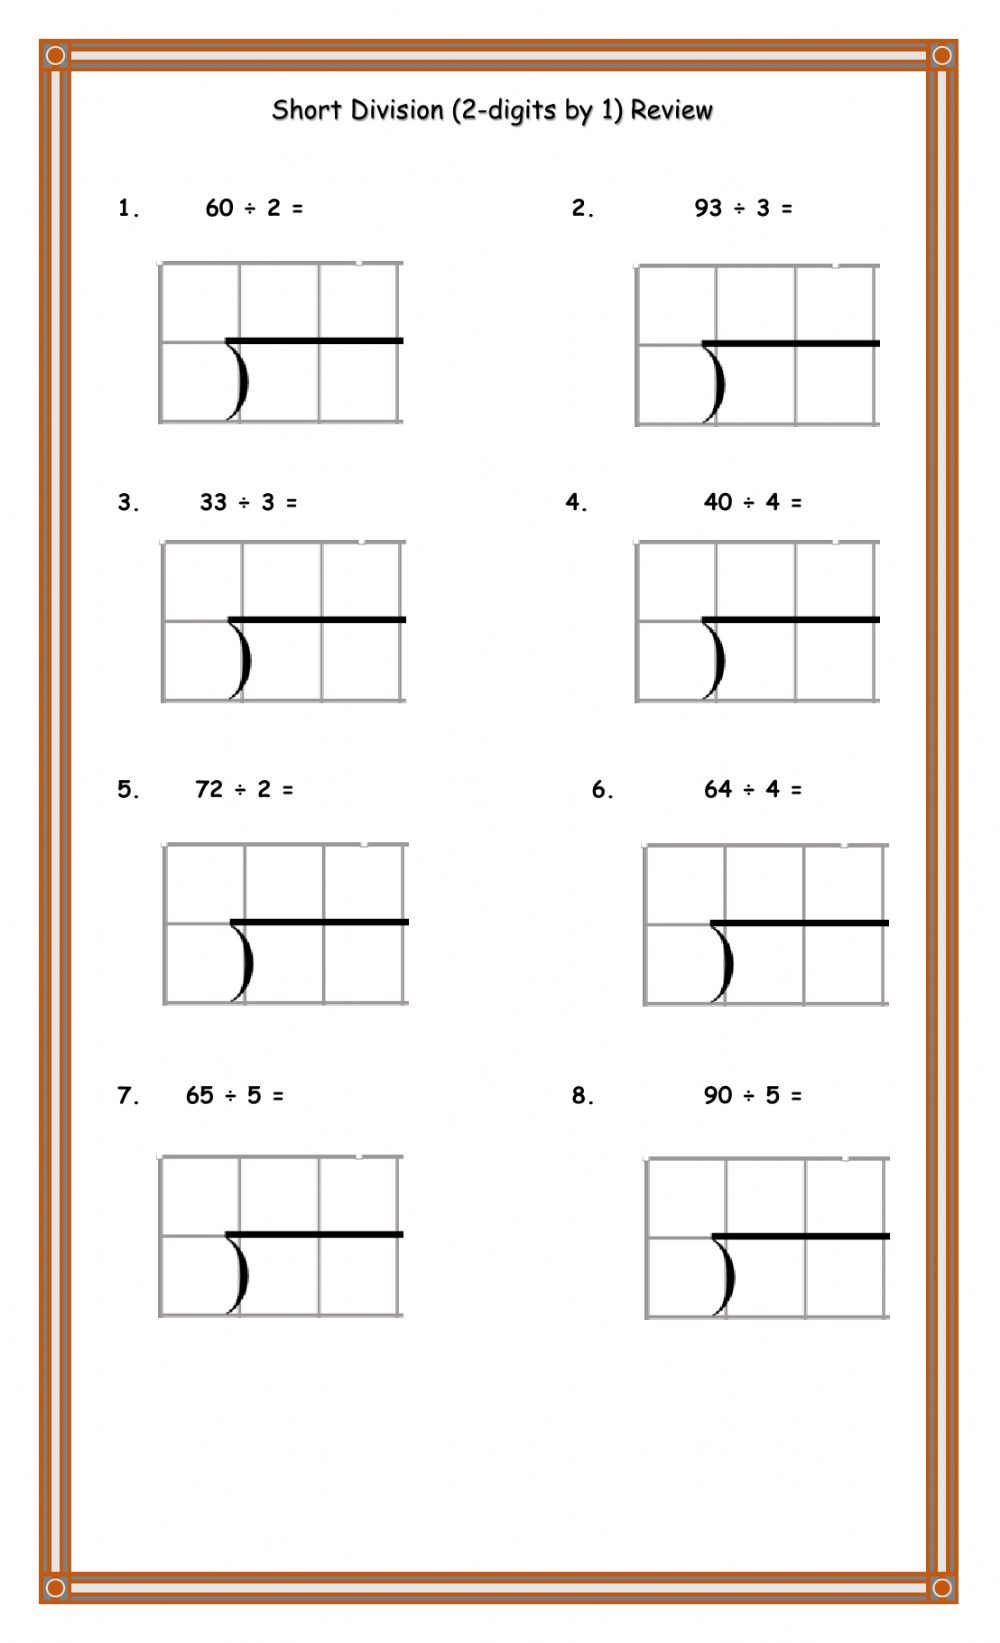 Create Your Own Division Worksheet